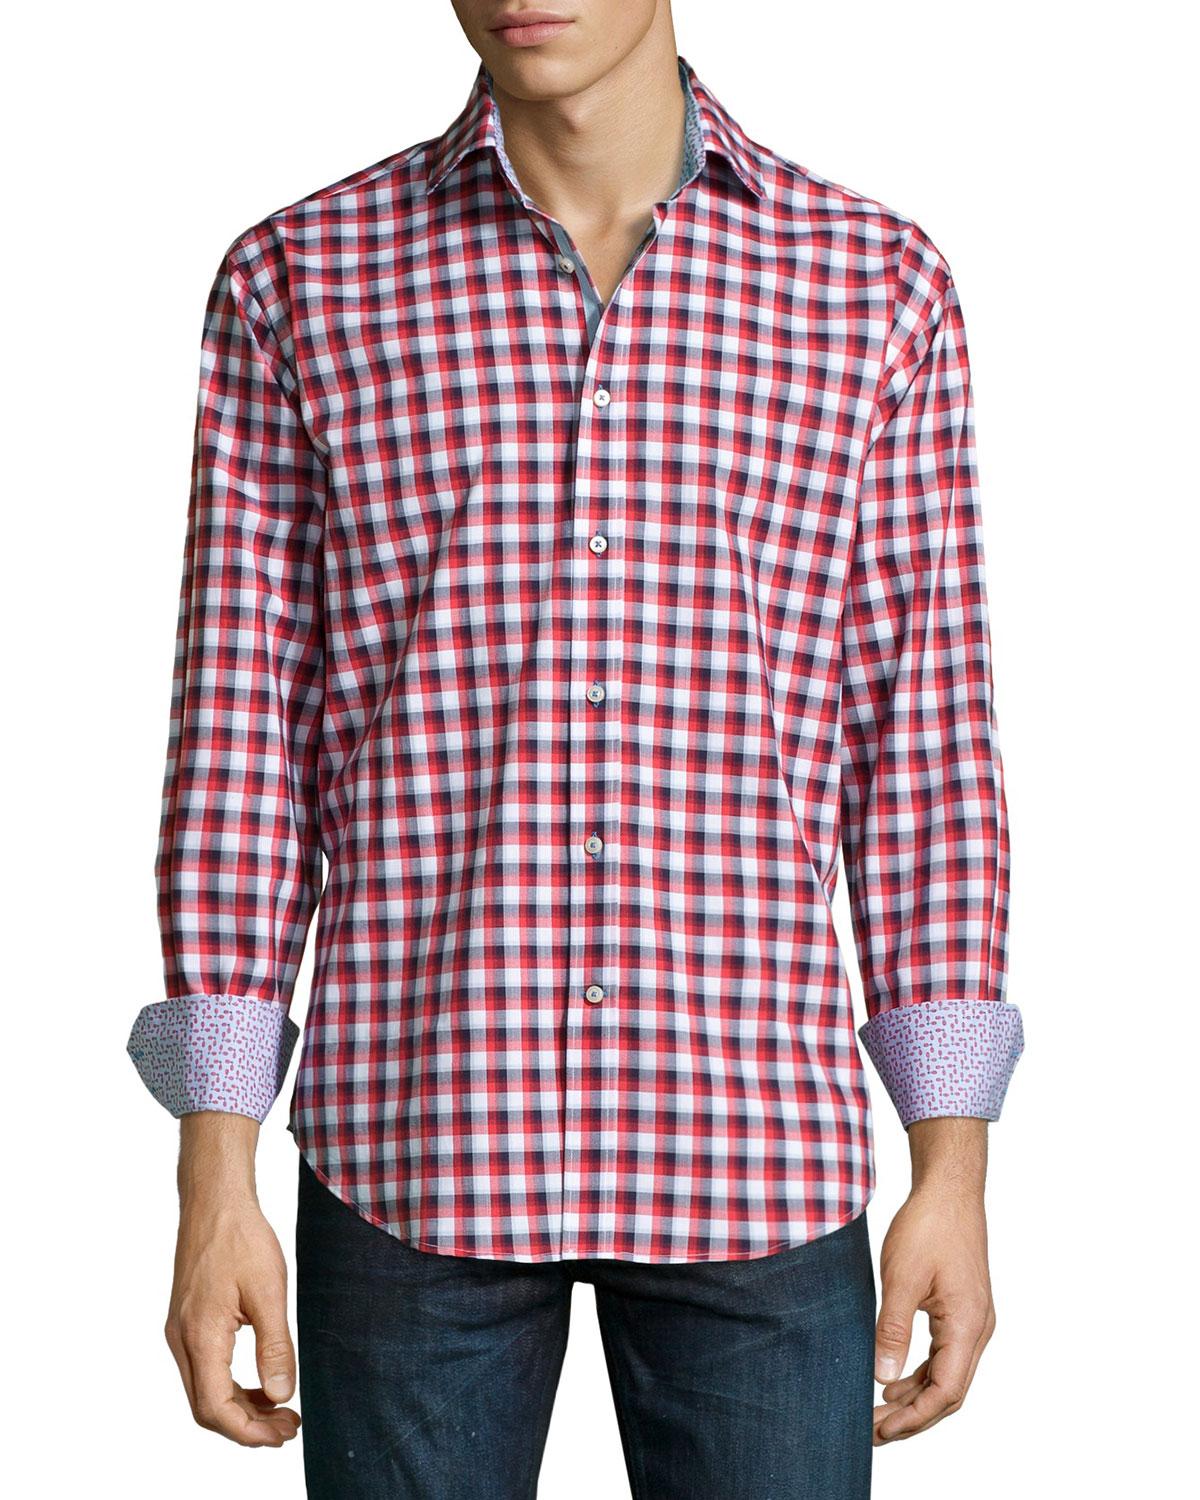 Lyst - Neiman Marcus Trim-fit Regular-finish Check Dress Shirt in Red ...